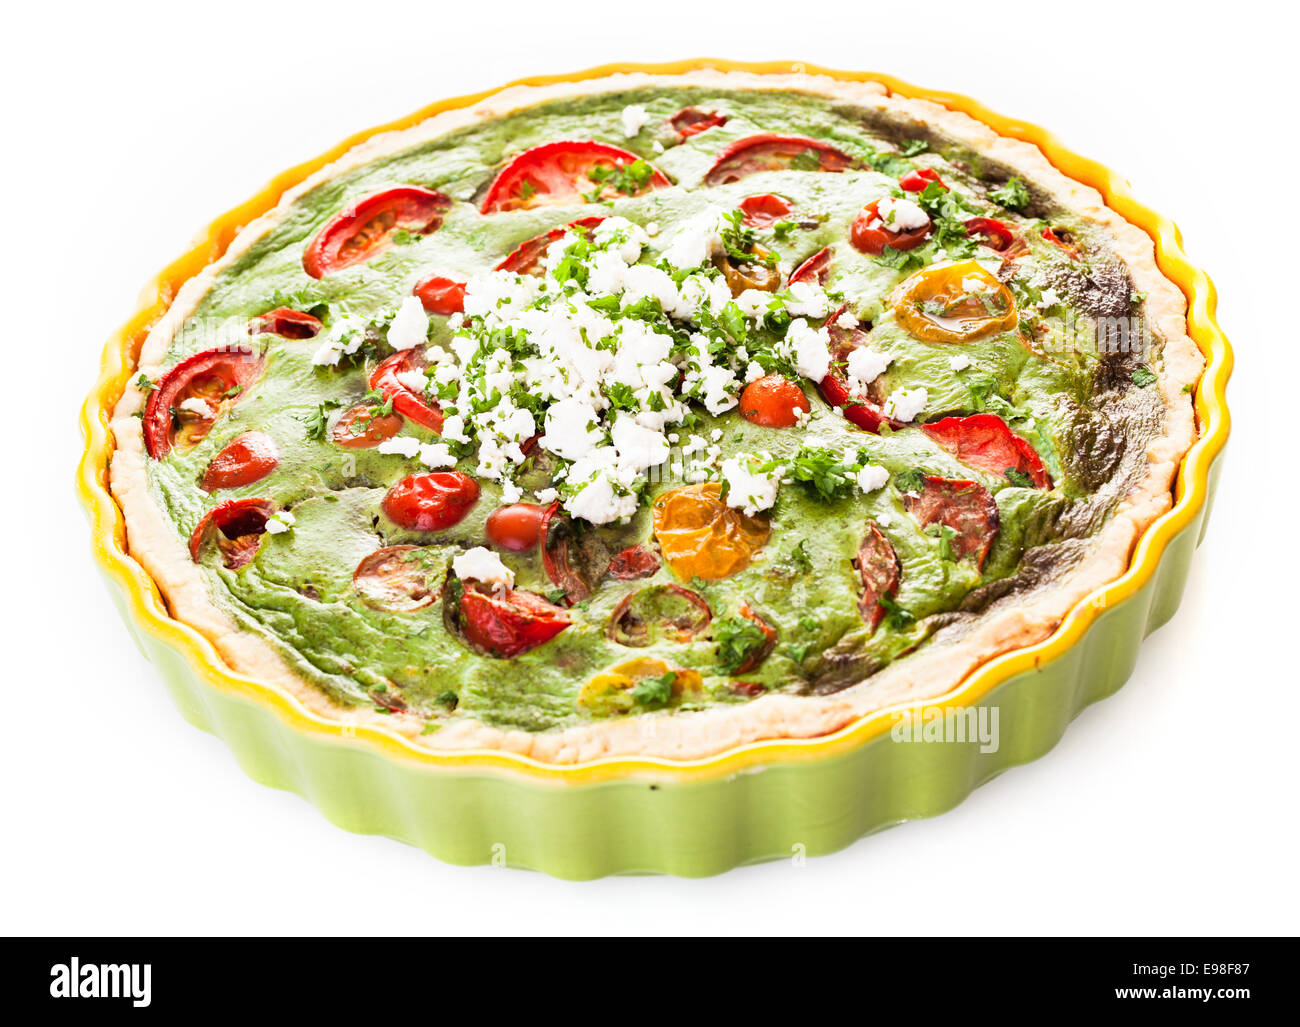 Savory egg tart with tomatoes, herbs and cheese on a golden pastry base served whole in a fluted green pie plate for a healthy delicious vegetarian meal Stock Photo